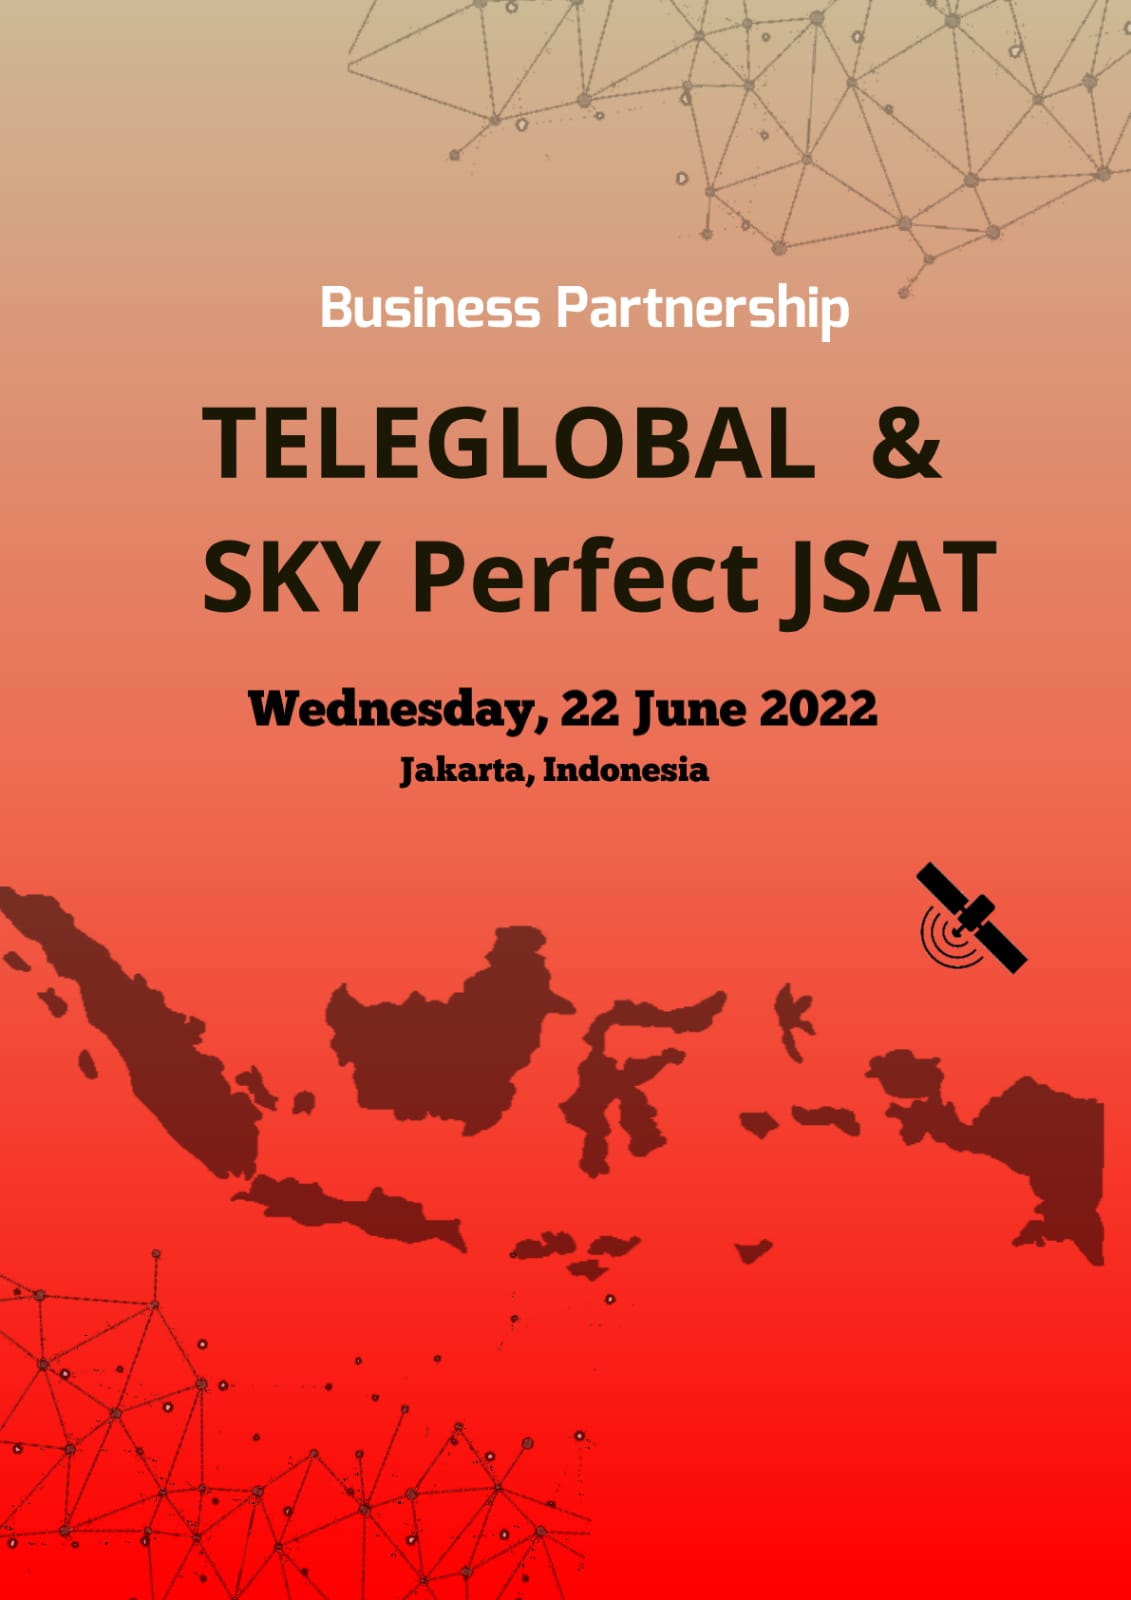 SKY Perfect JSAT partners with Teleglobal To Provide JCSAT-1C HTS services in Indonesia